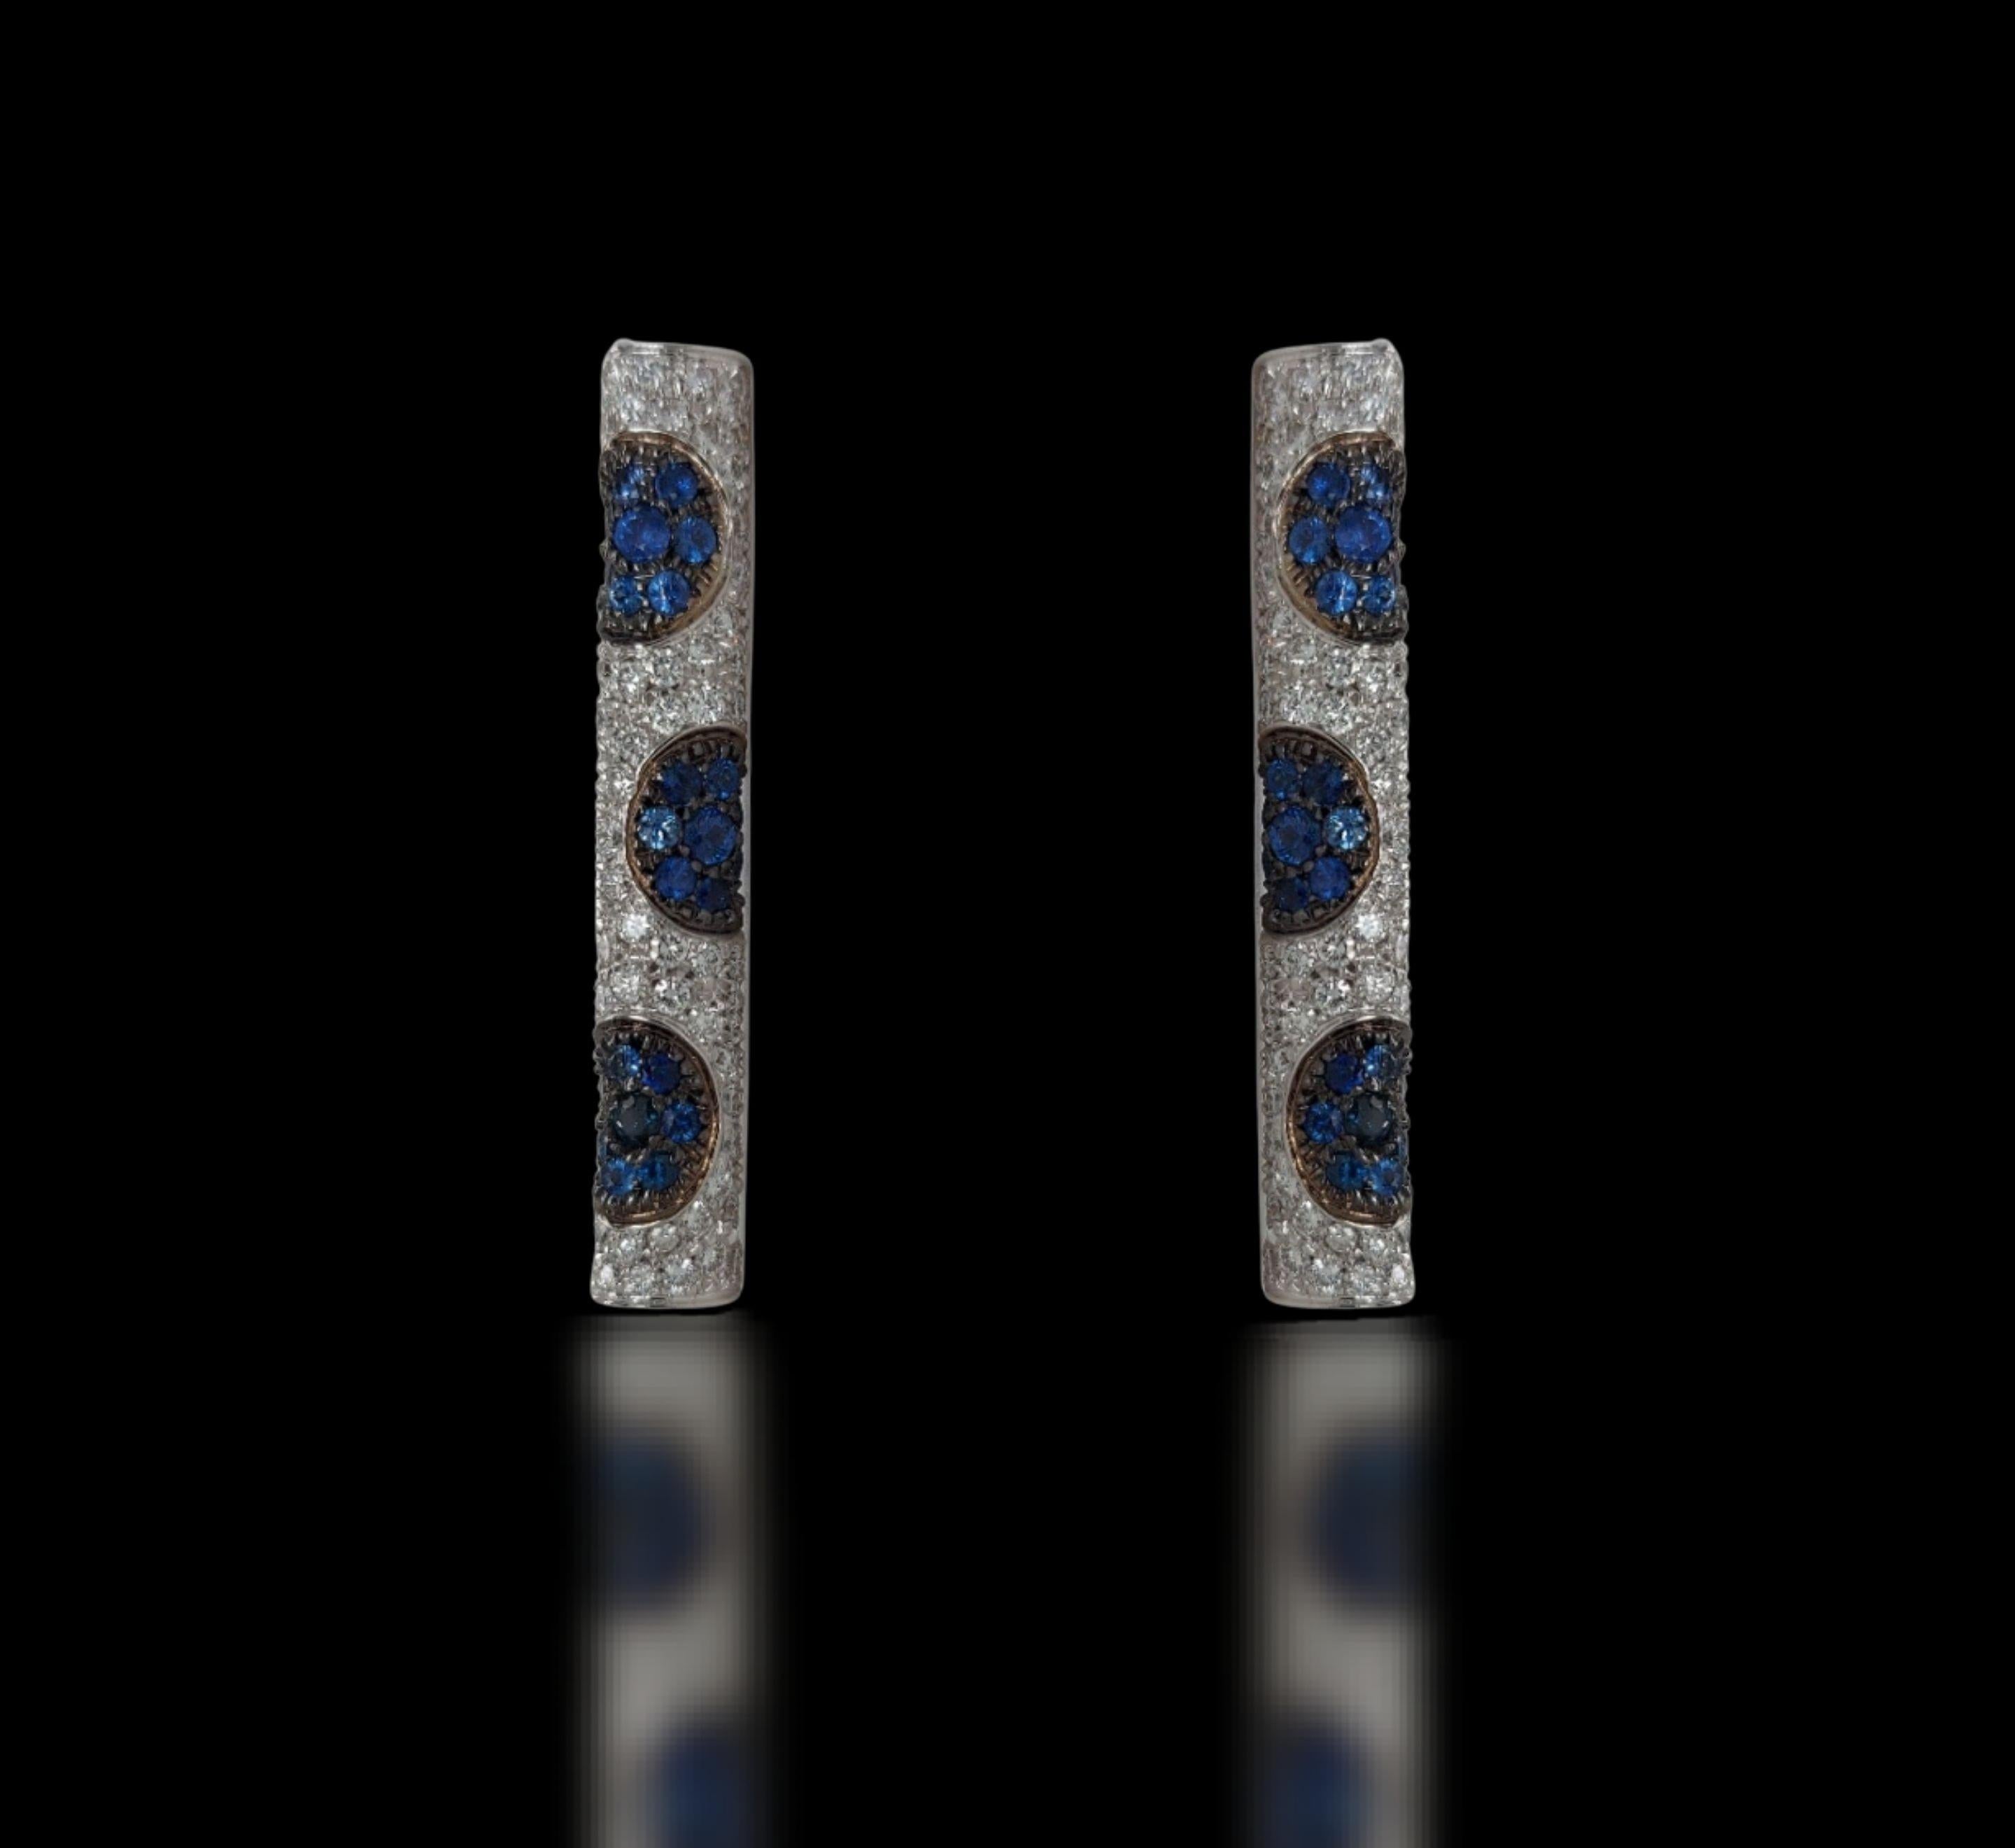 18kt White Gold Bar Earrings with 2.04ct White and 2ct sapphires, Can be purchased with a matching Necklace

Diamonds: Brilliant cut diamonds together 2.04ct 

Sapphires: Brilliant cut sapphires together 2ct

Materials: 18kt white